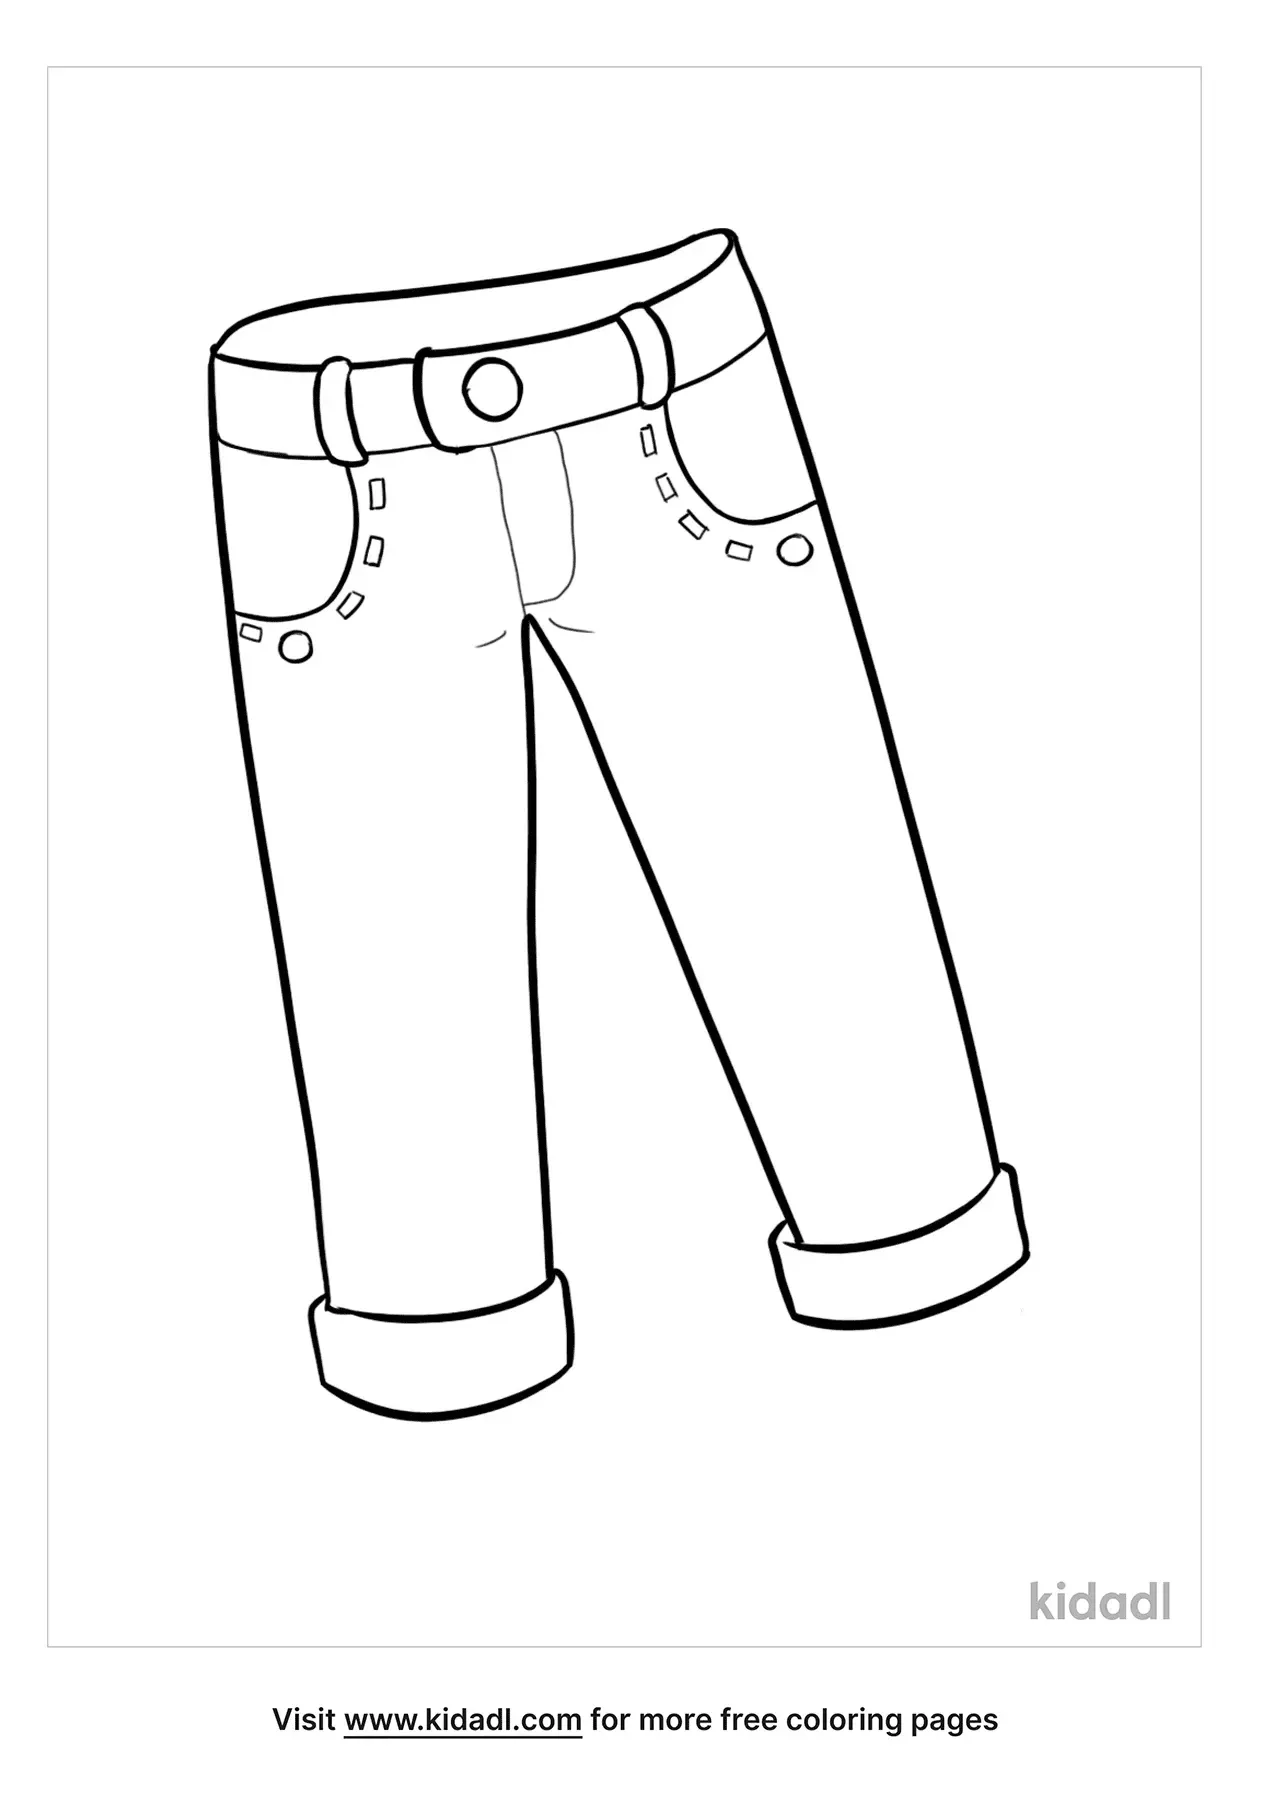 Coloring Page trousers  free printable coloring pages  Img 19357